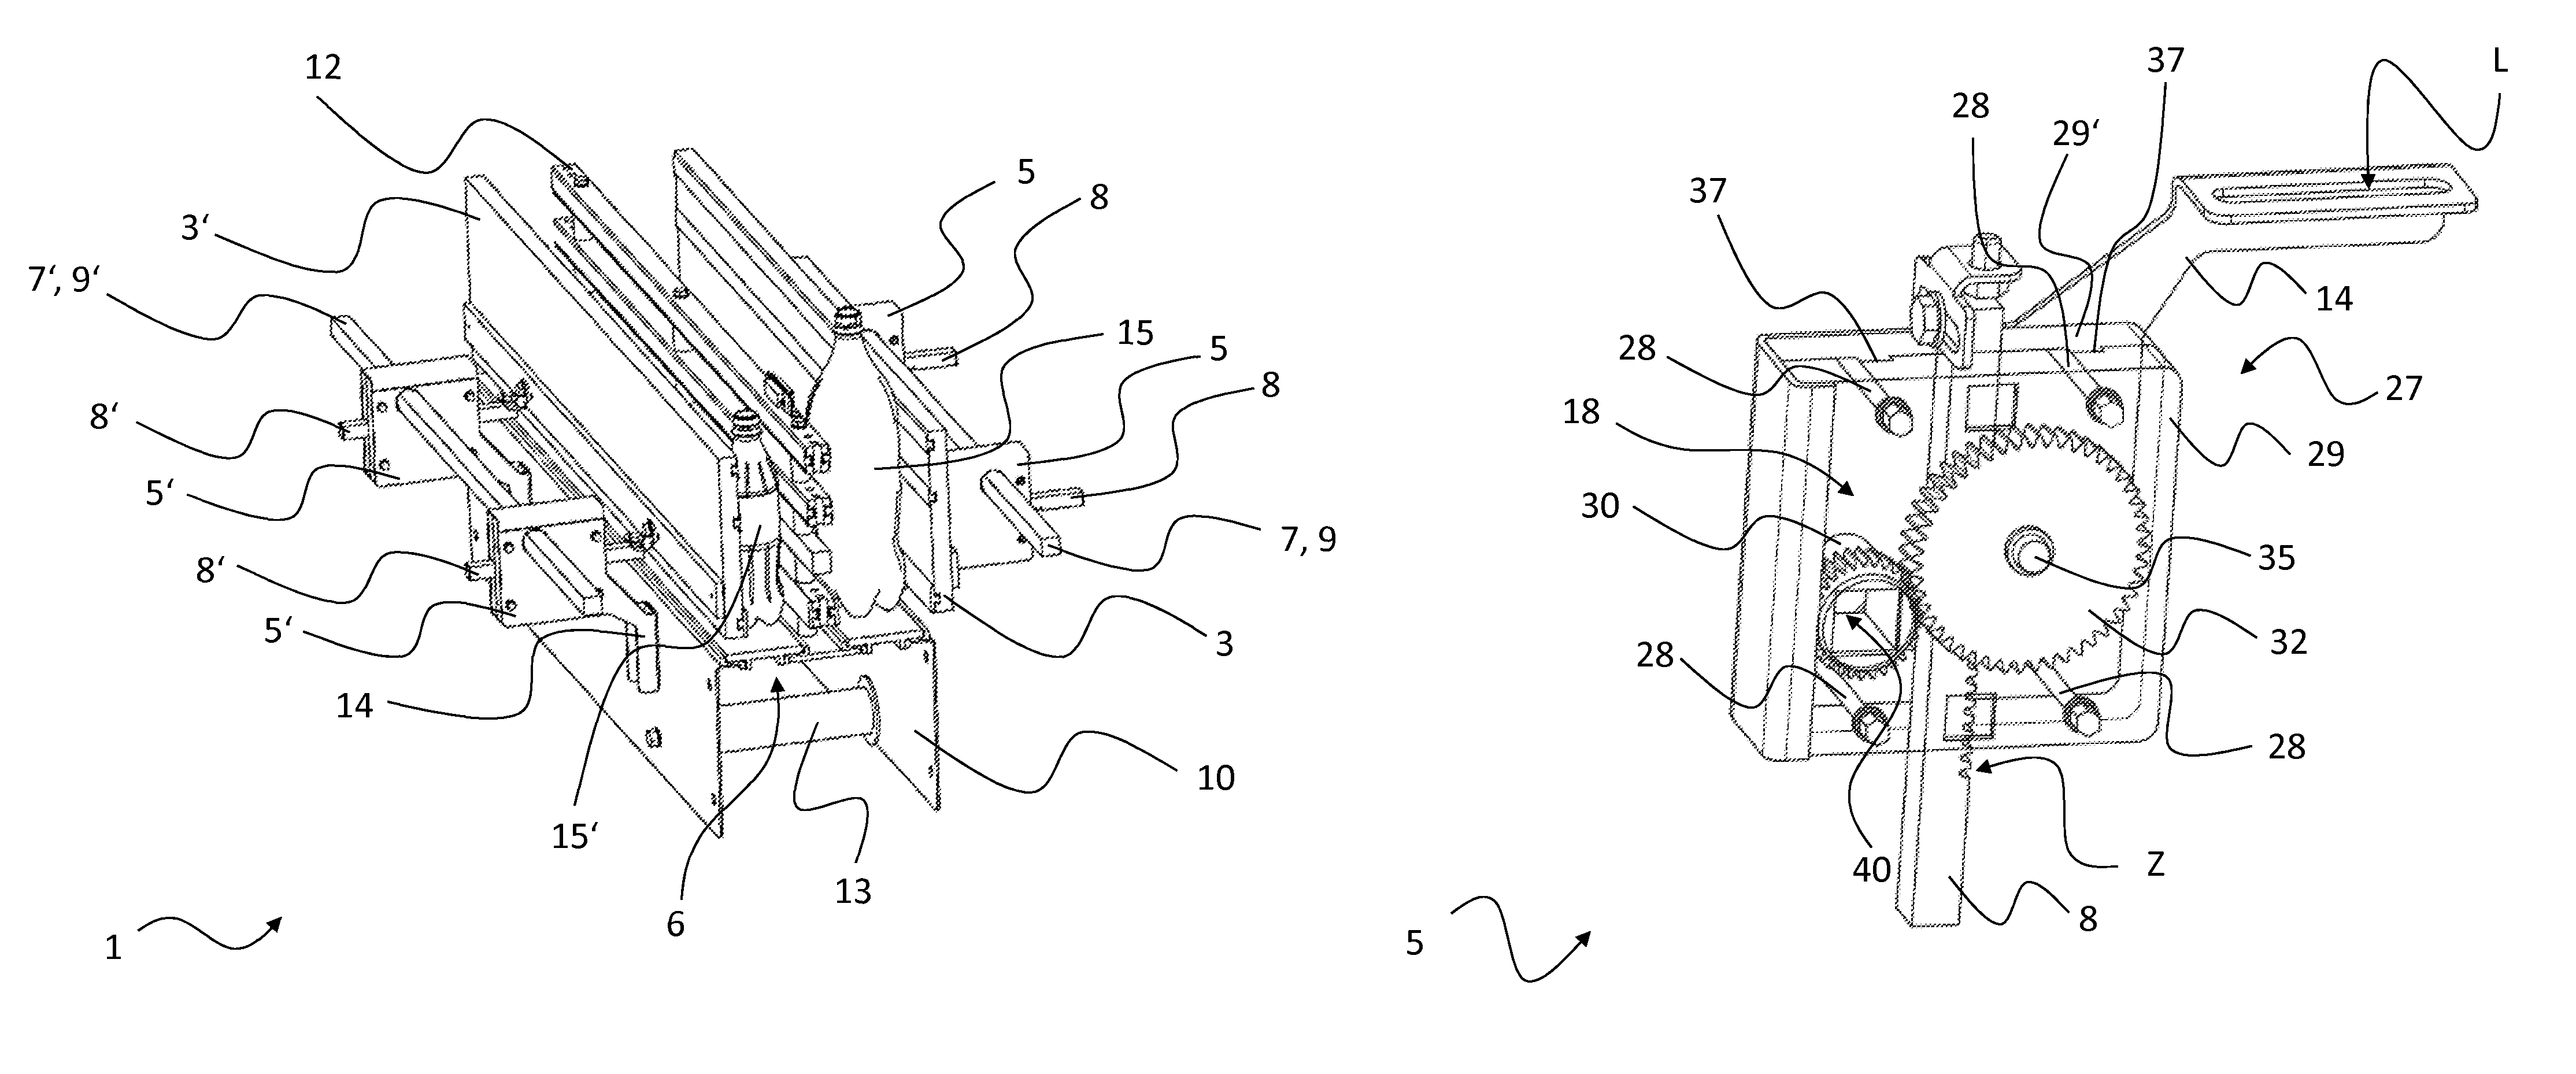 Transport section of a horizontal conveyor device with at least one adjustable guide element